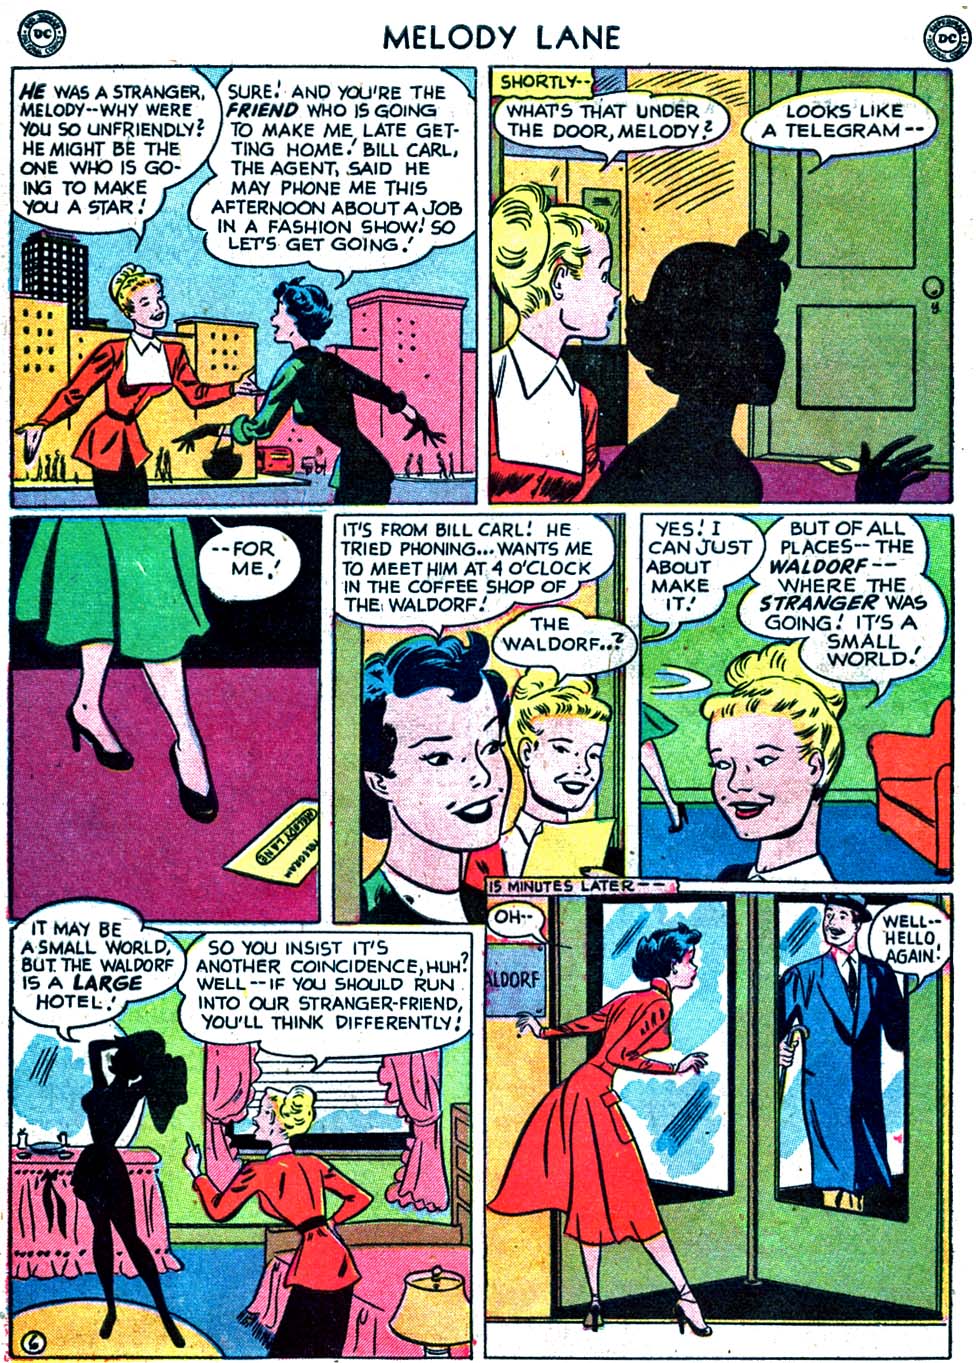 Read online Miss Melody Lane of Broadway comic -  Issue #2 - 8